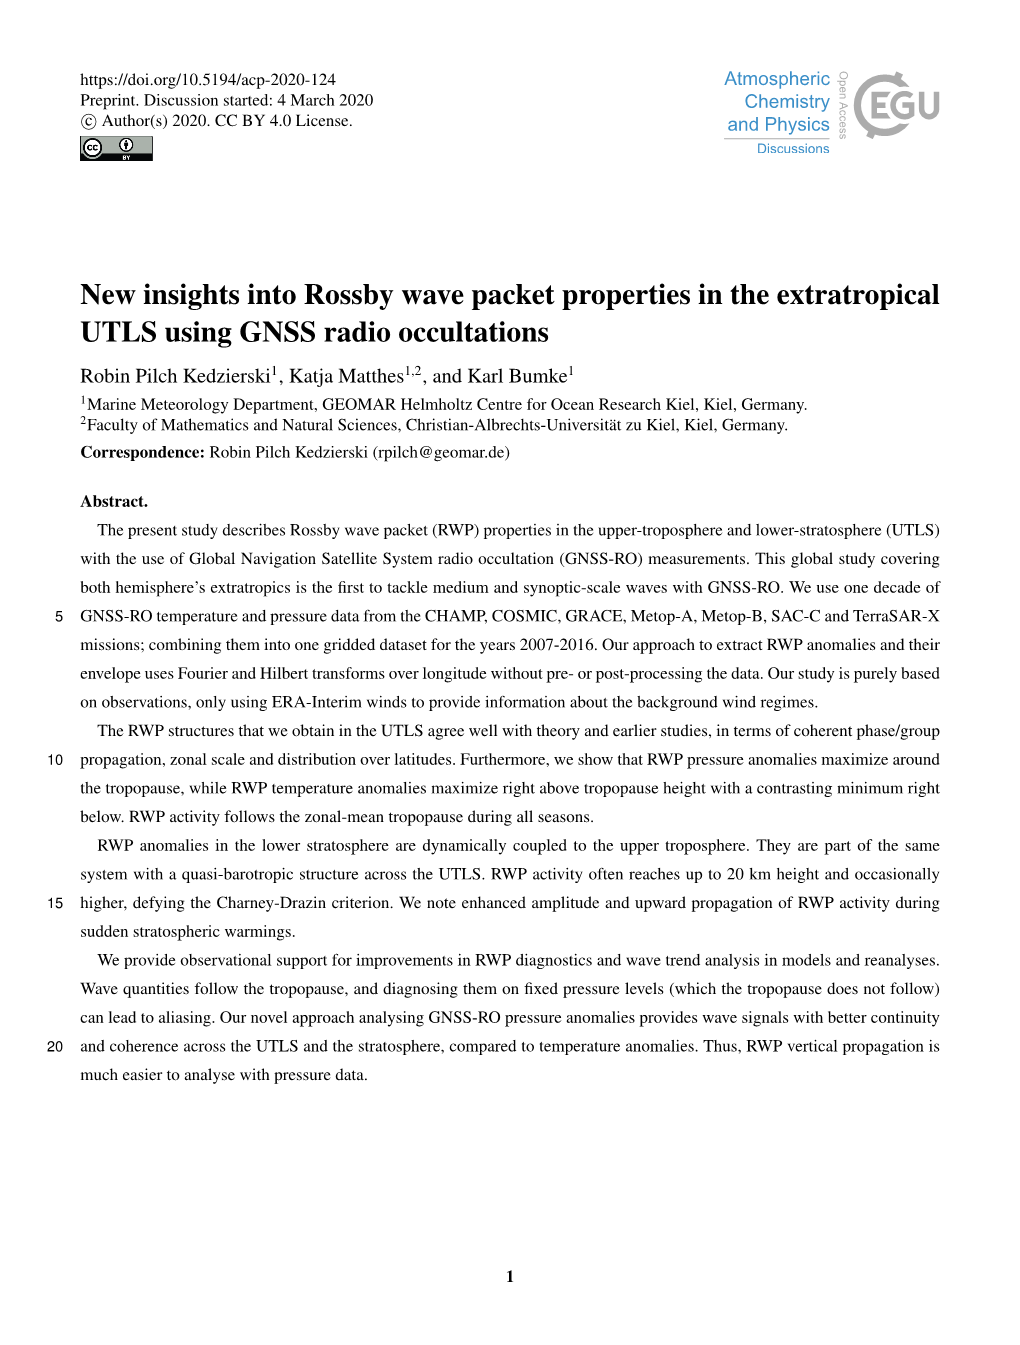 New Insights Into Rossby Wave Packet Properties in the Extratropical UTLS Using GNSS Radio Occultations